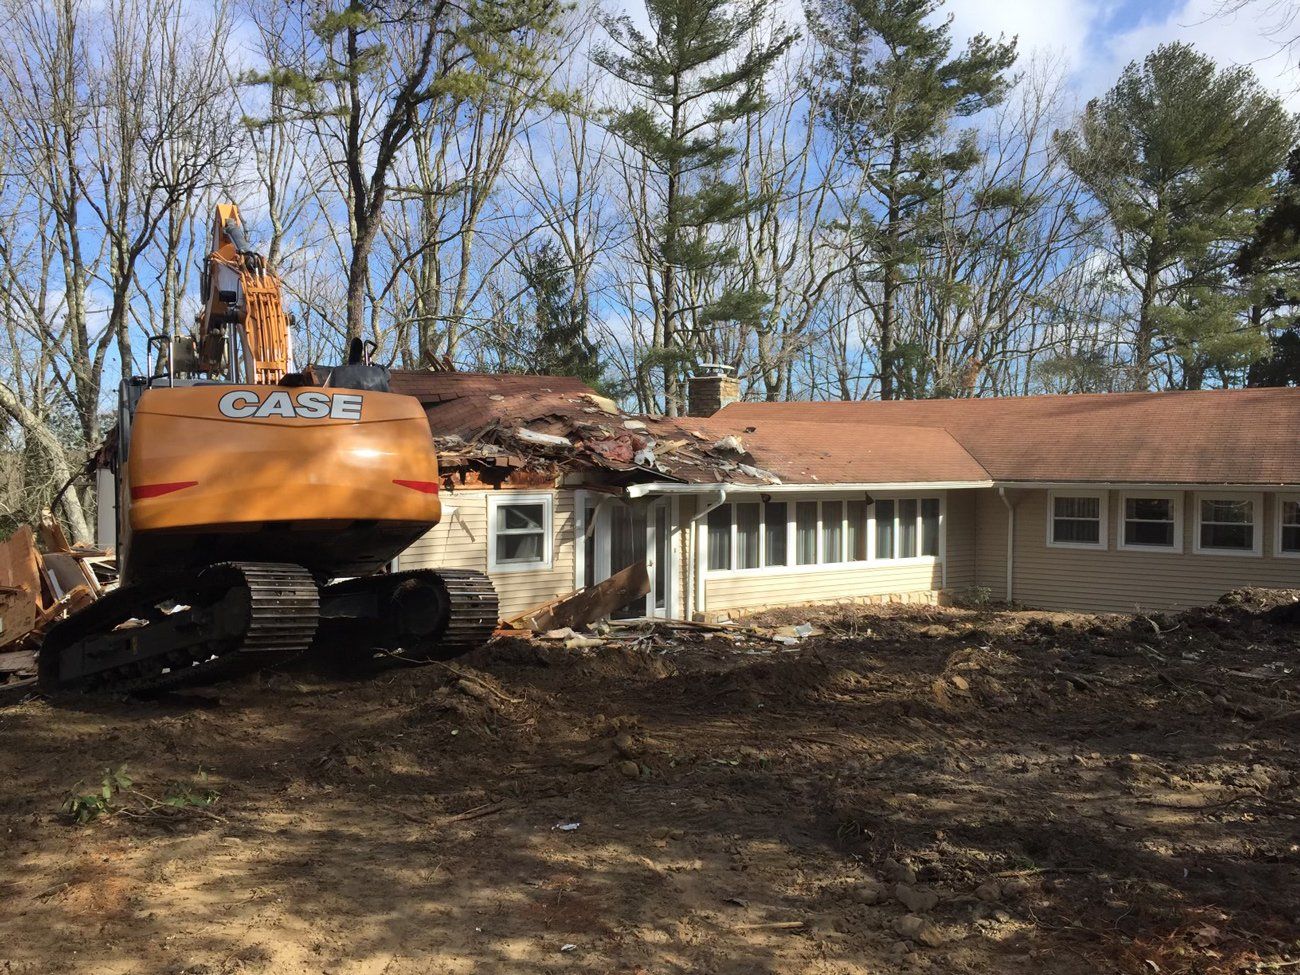 Excavator and White House — Demolition in Sewell, NJ